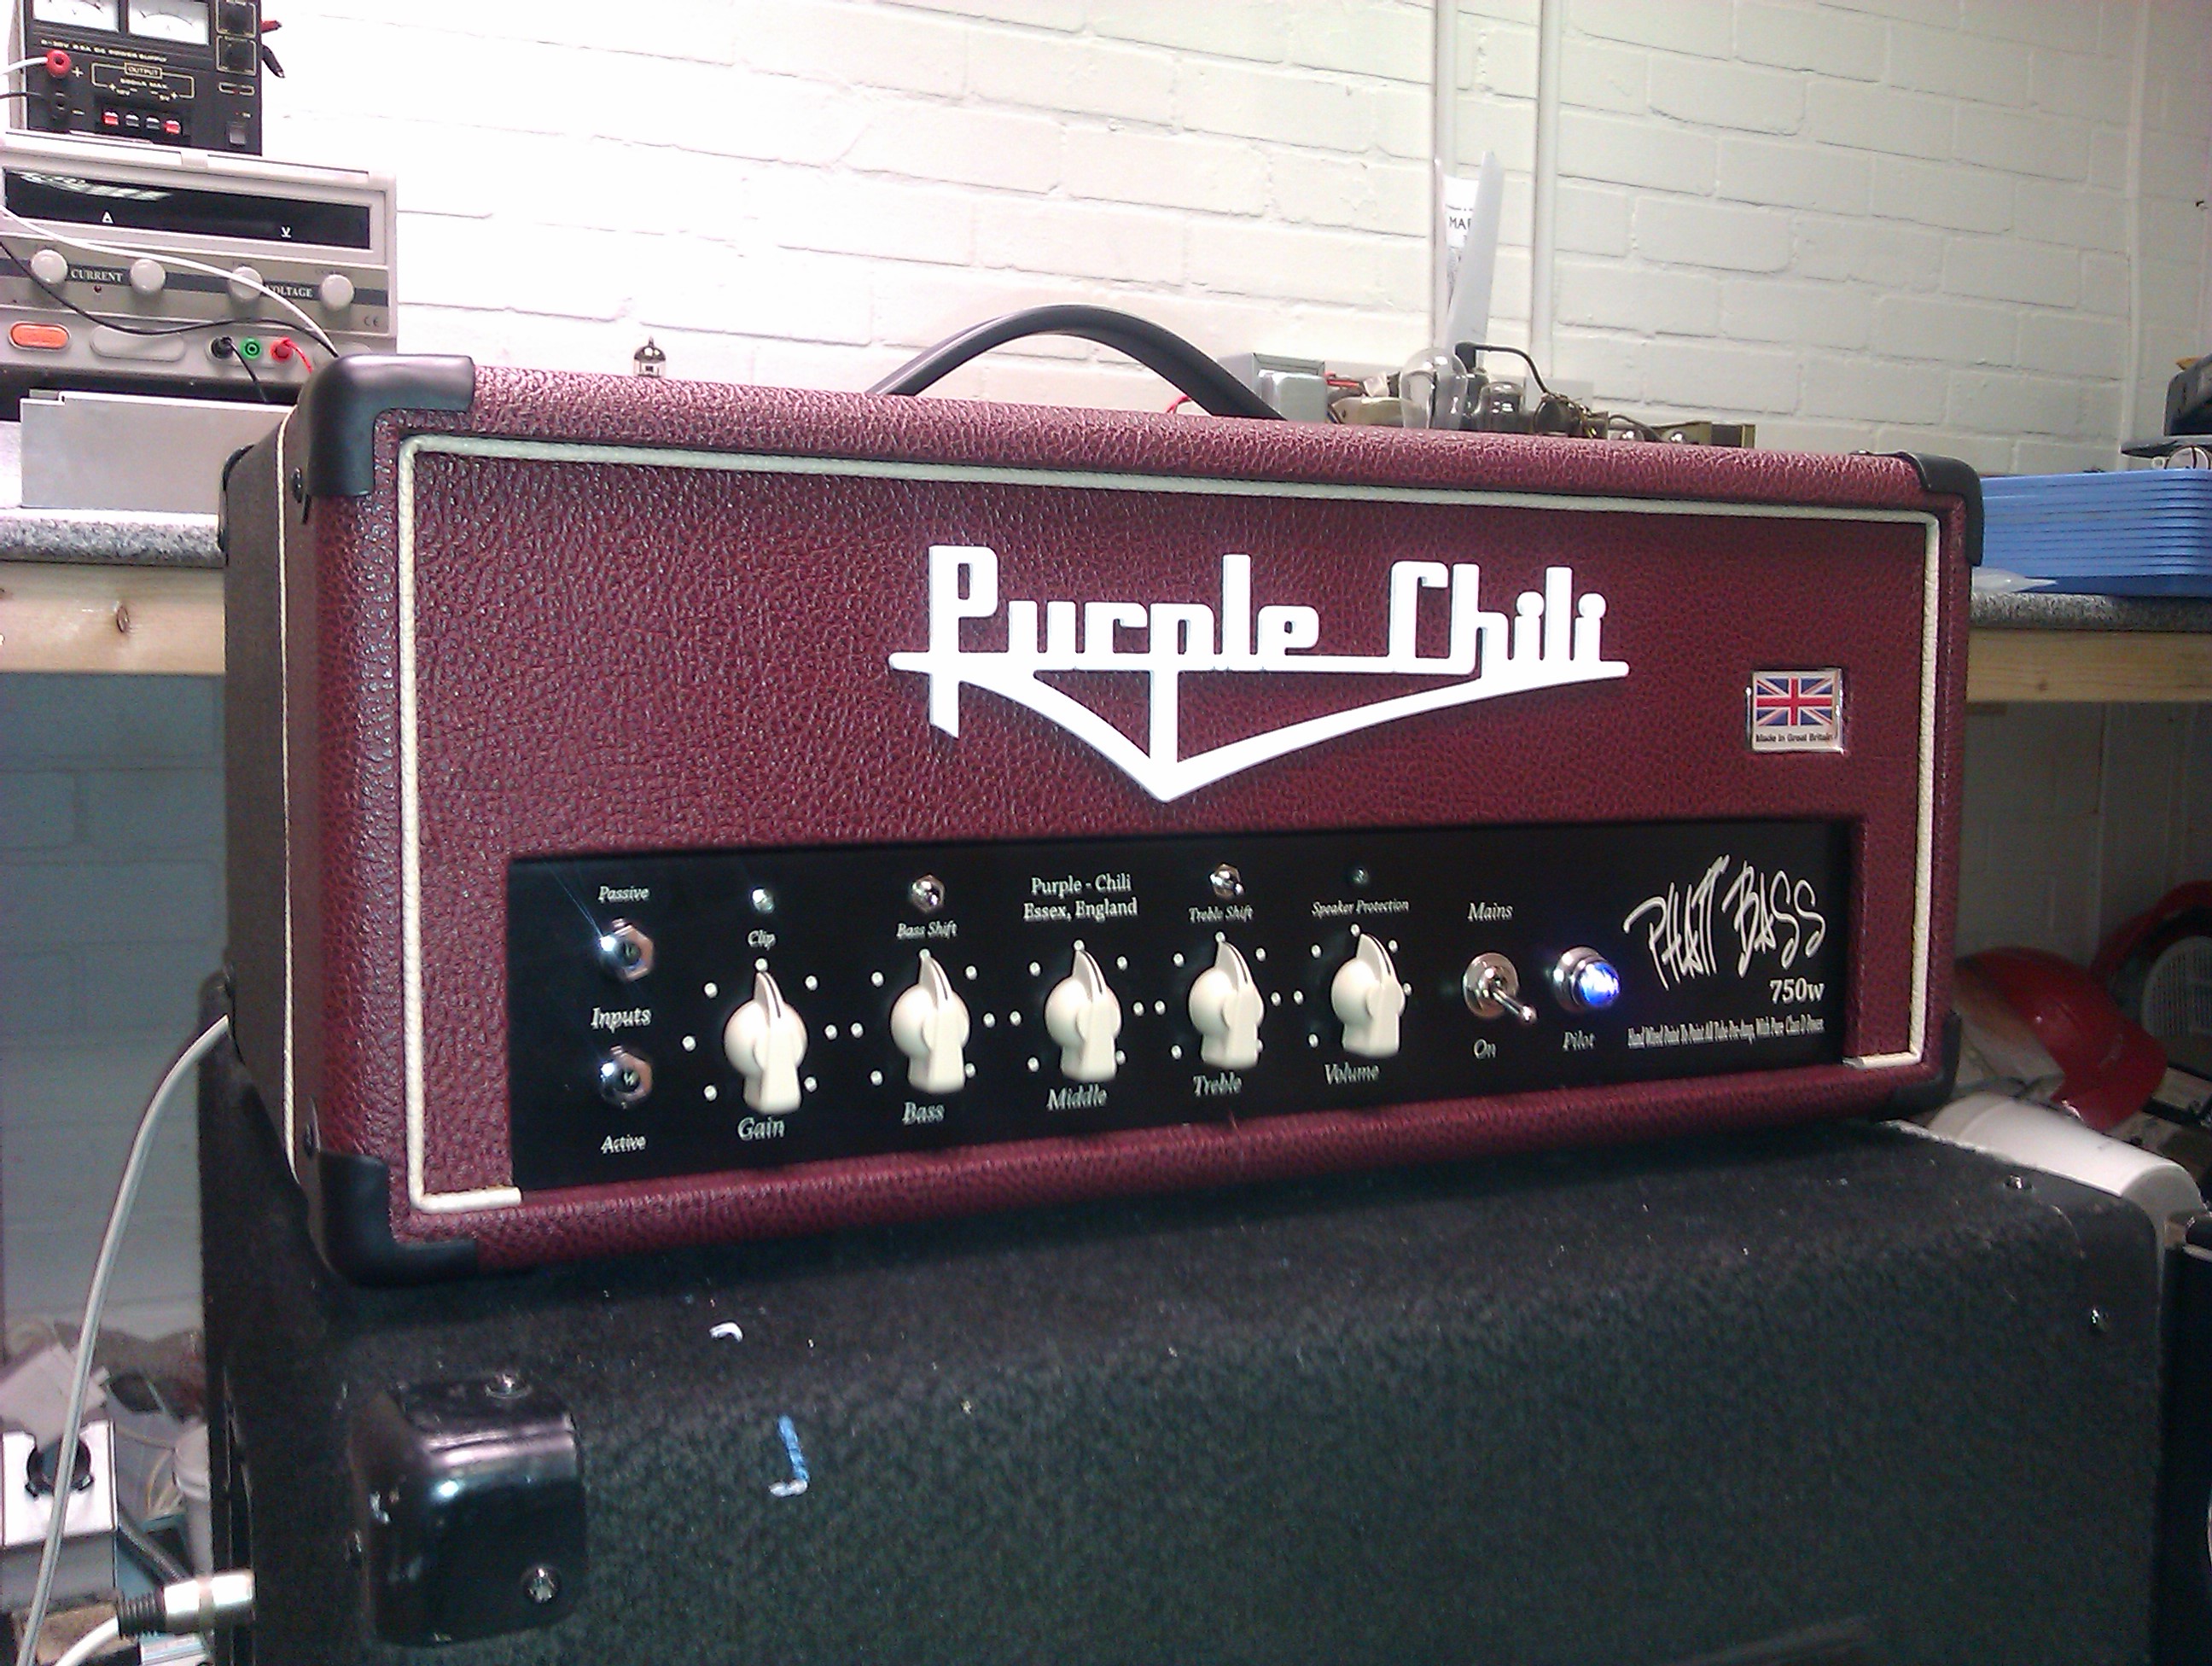 750W very real watts of Class D power, coupled with the warmth of a valve preamp